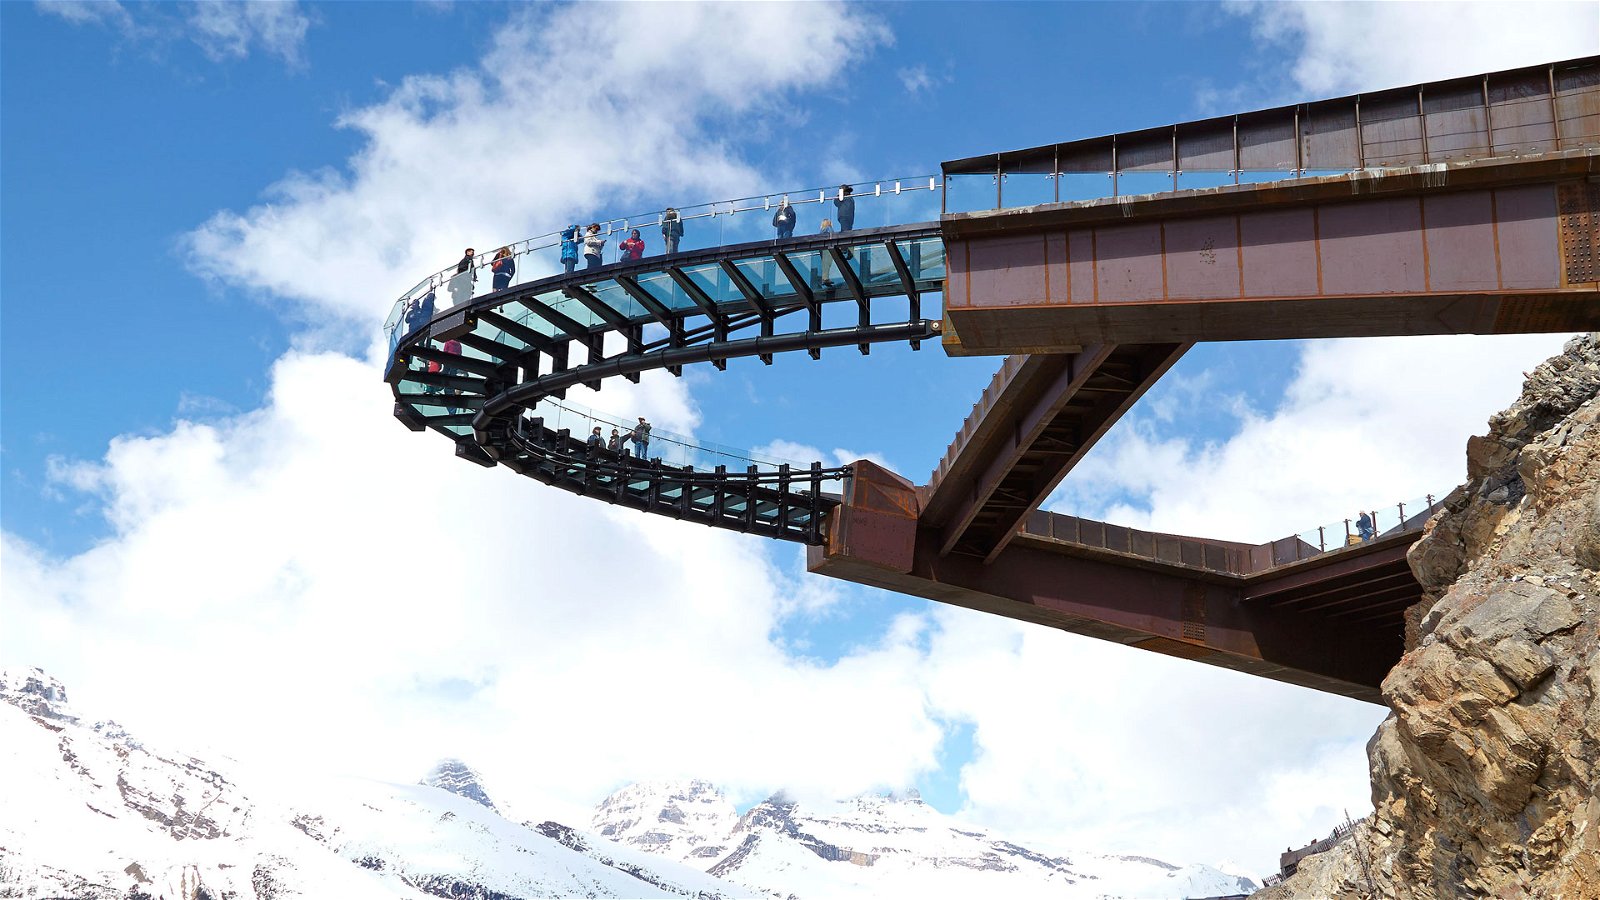 Columbia Icefield Skywalk Construction